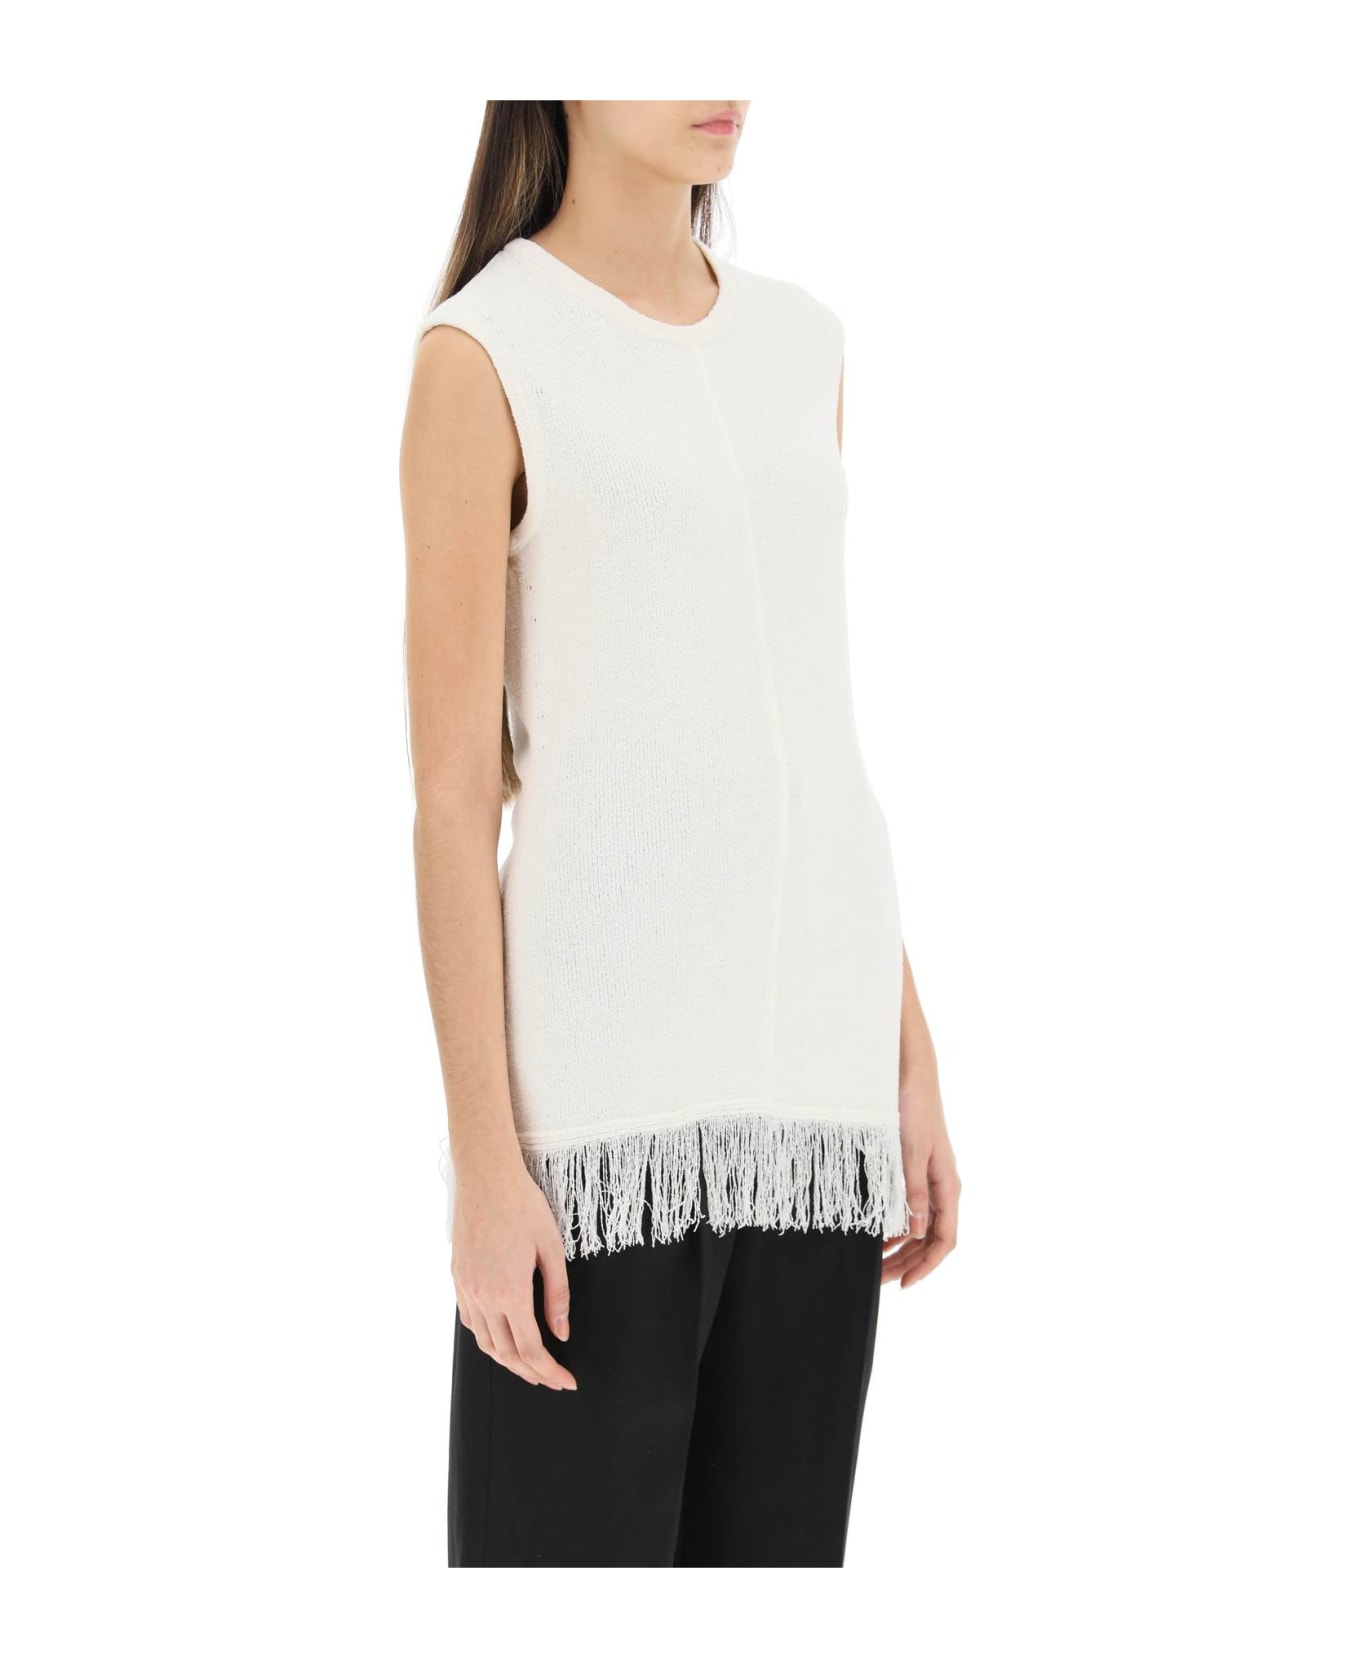 Loulou Studio Fringed Bouclé Knit Top - IVORY (White)